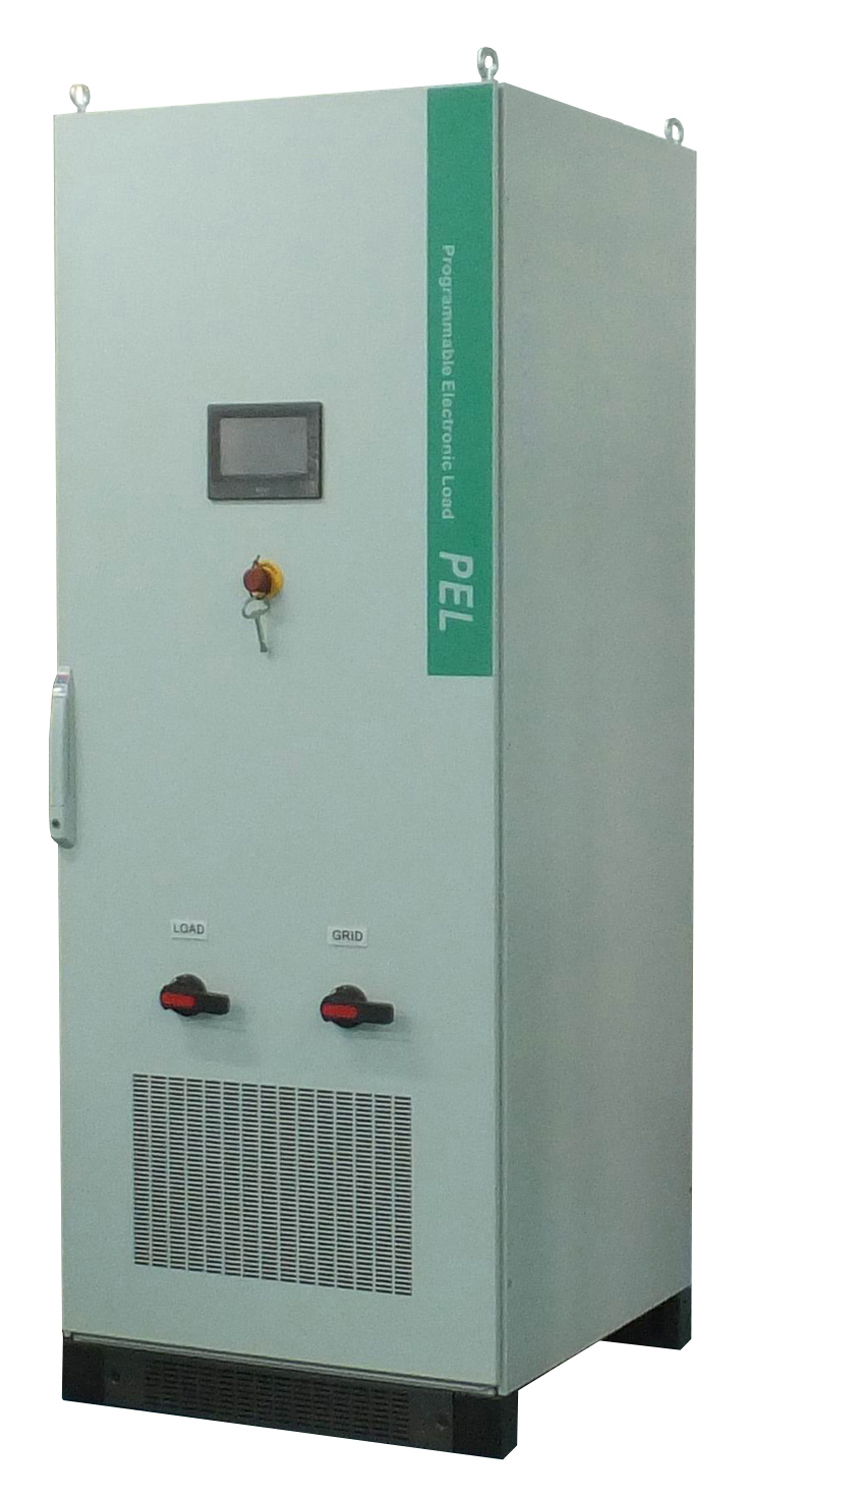 Intepro’s regenerative AC load bank reduces energy costs up to 90%